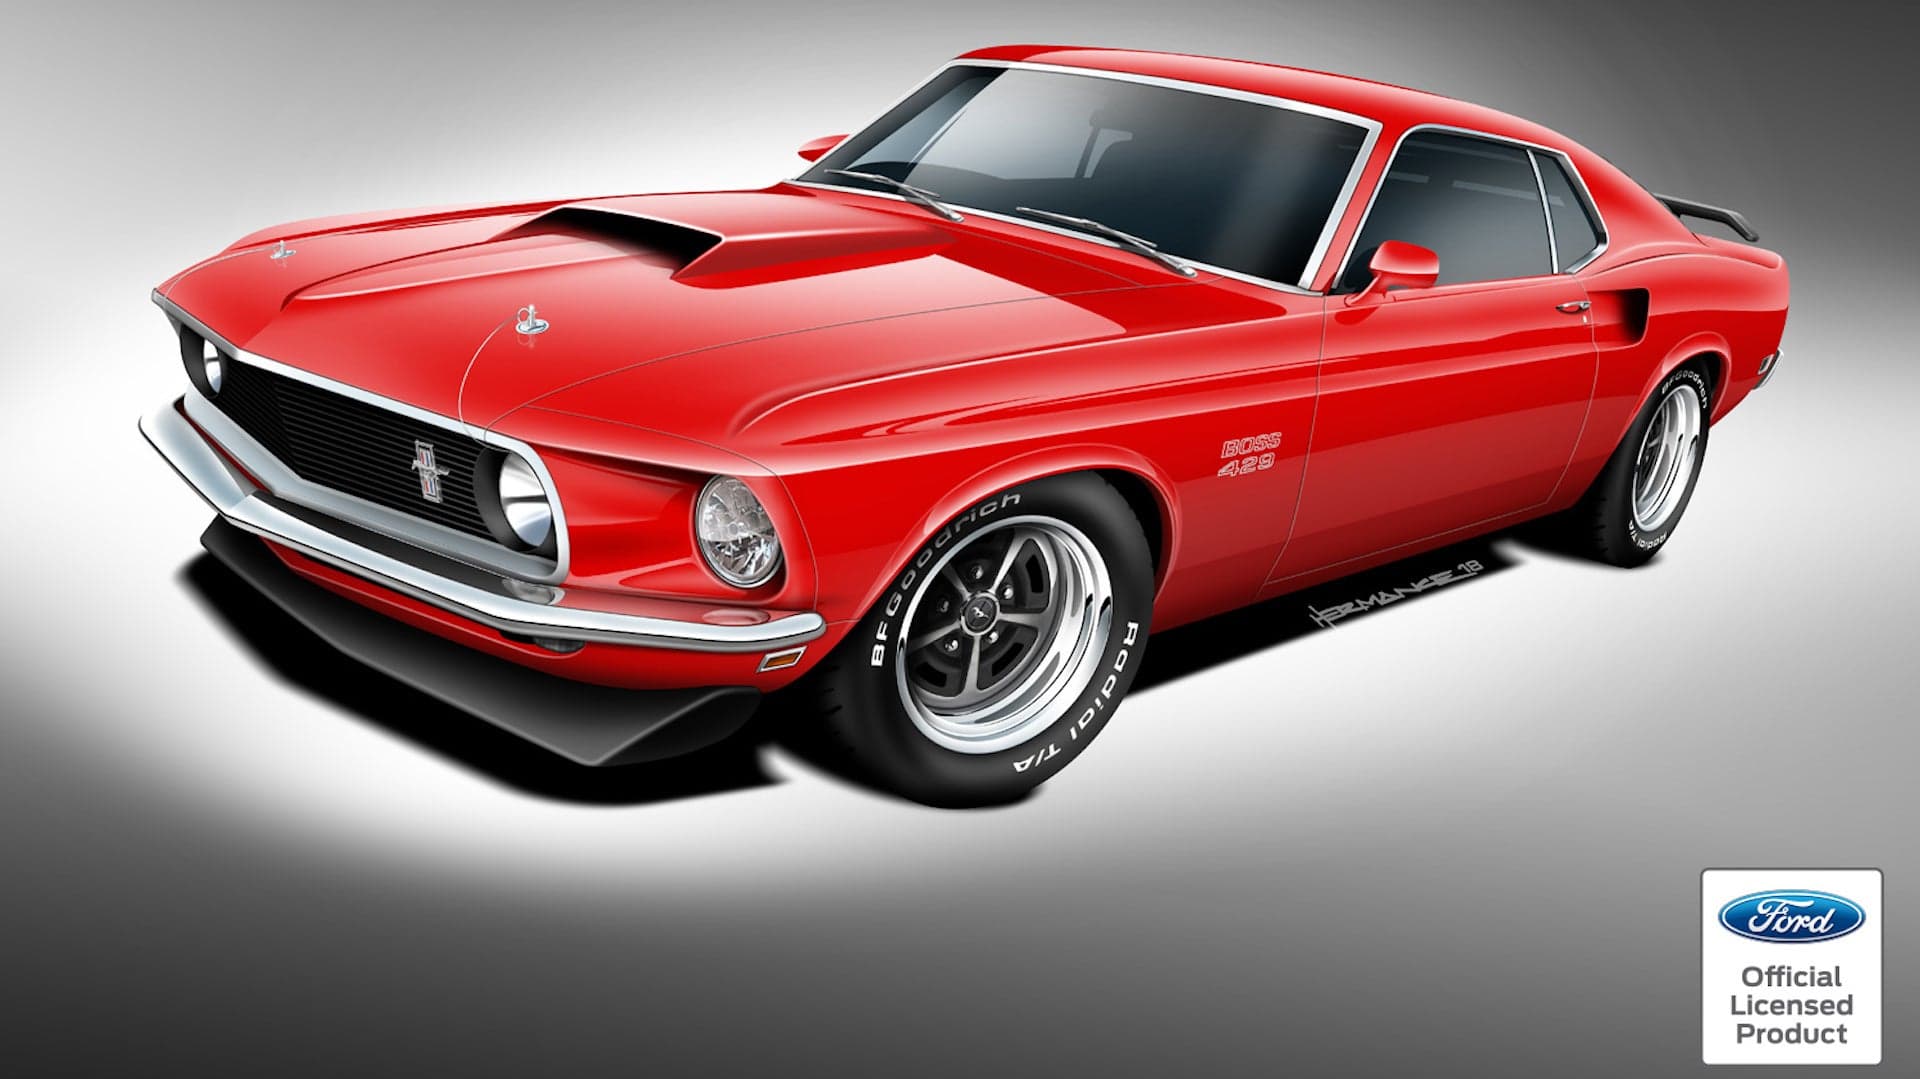 These Classic Ford Mustang Boss 429 Continuations Are Arriving at SEMA 2018